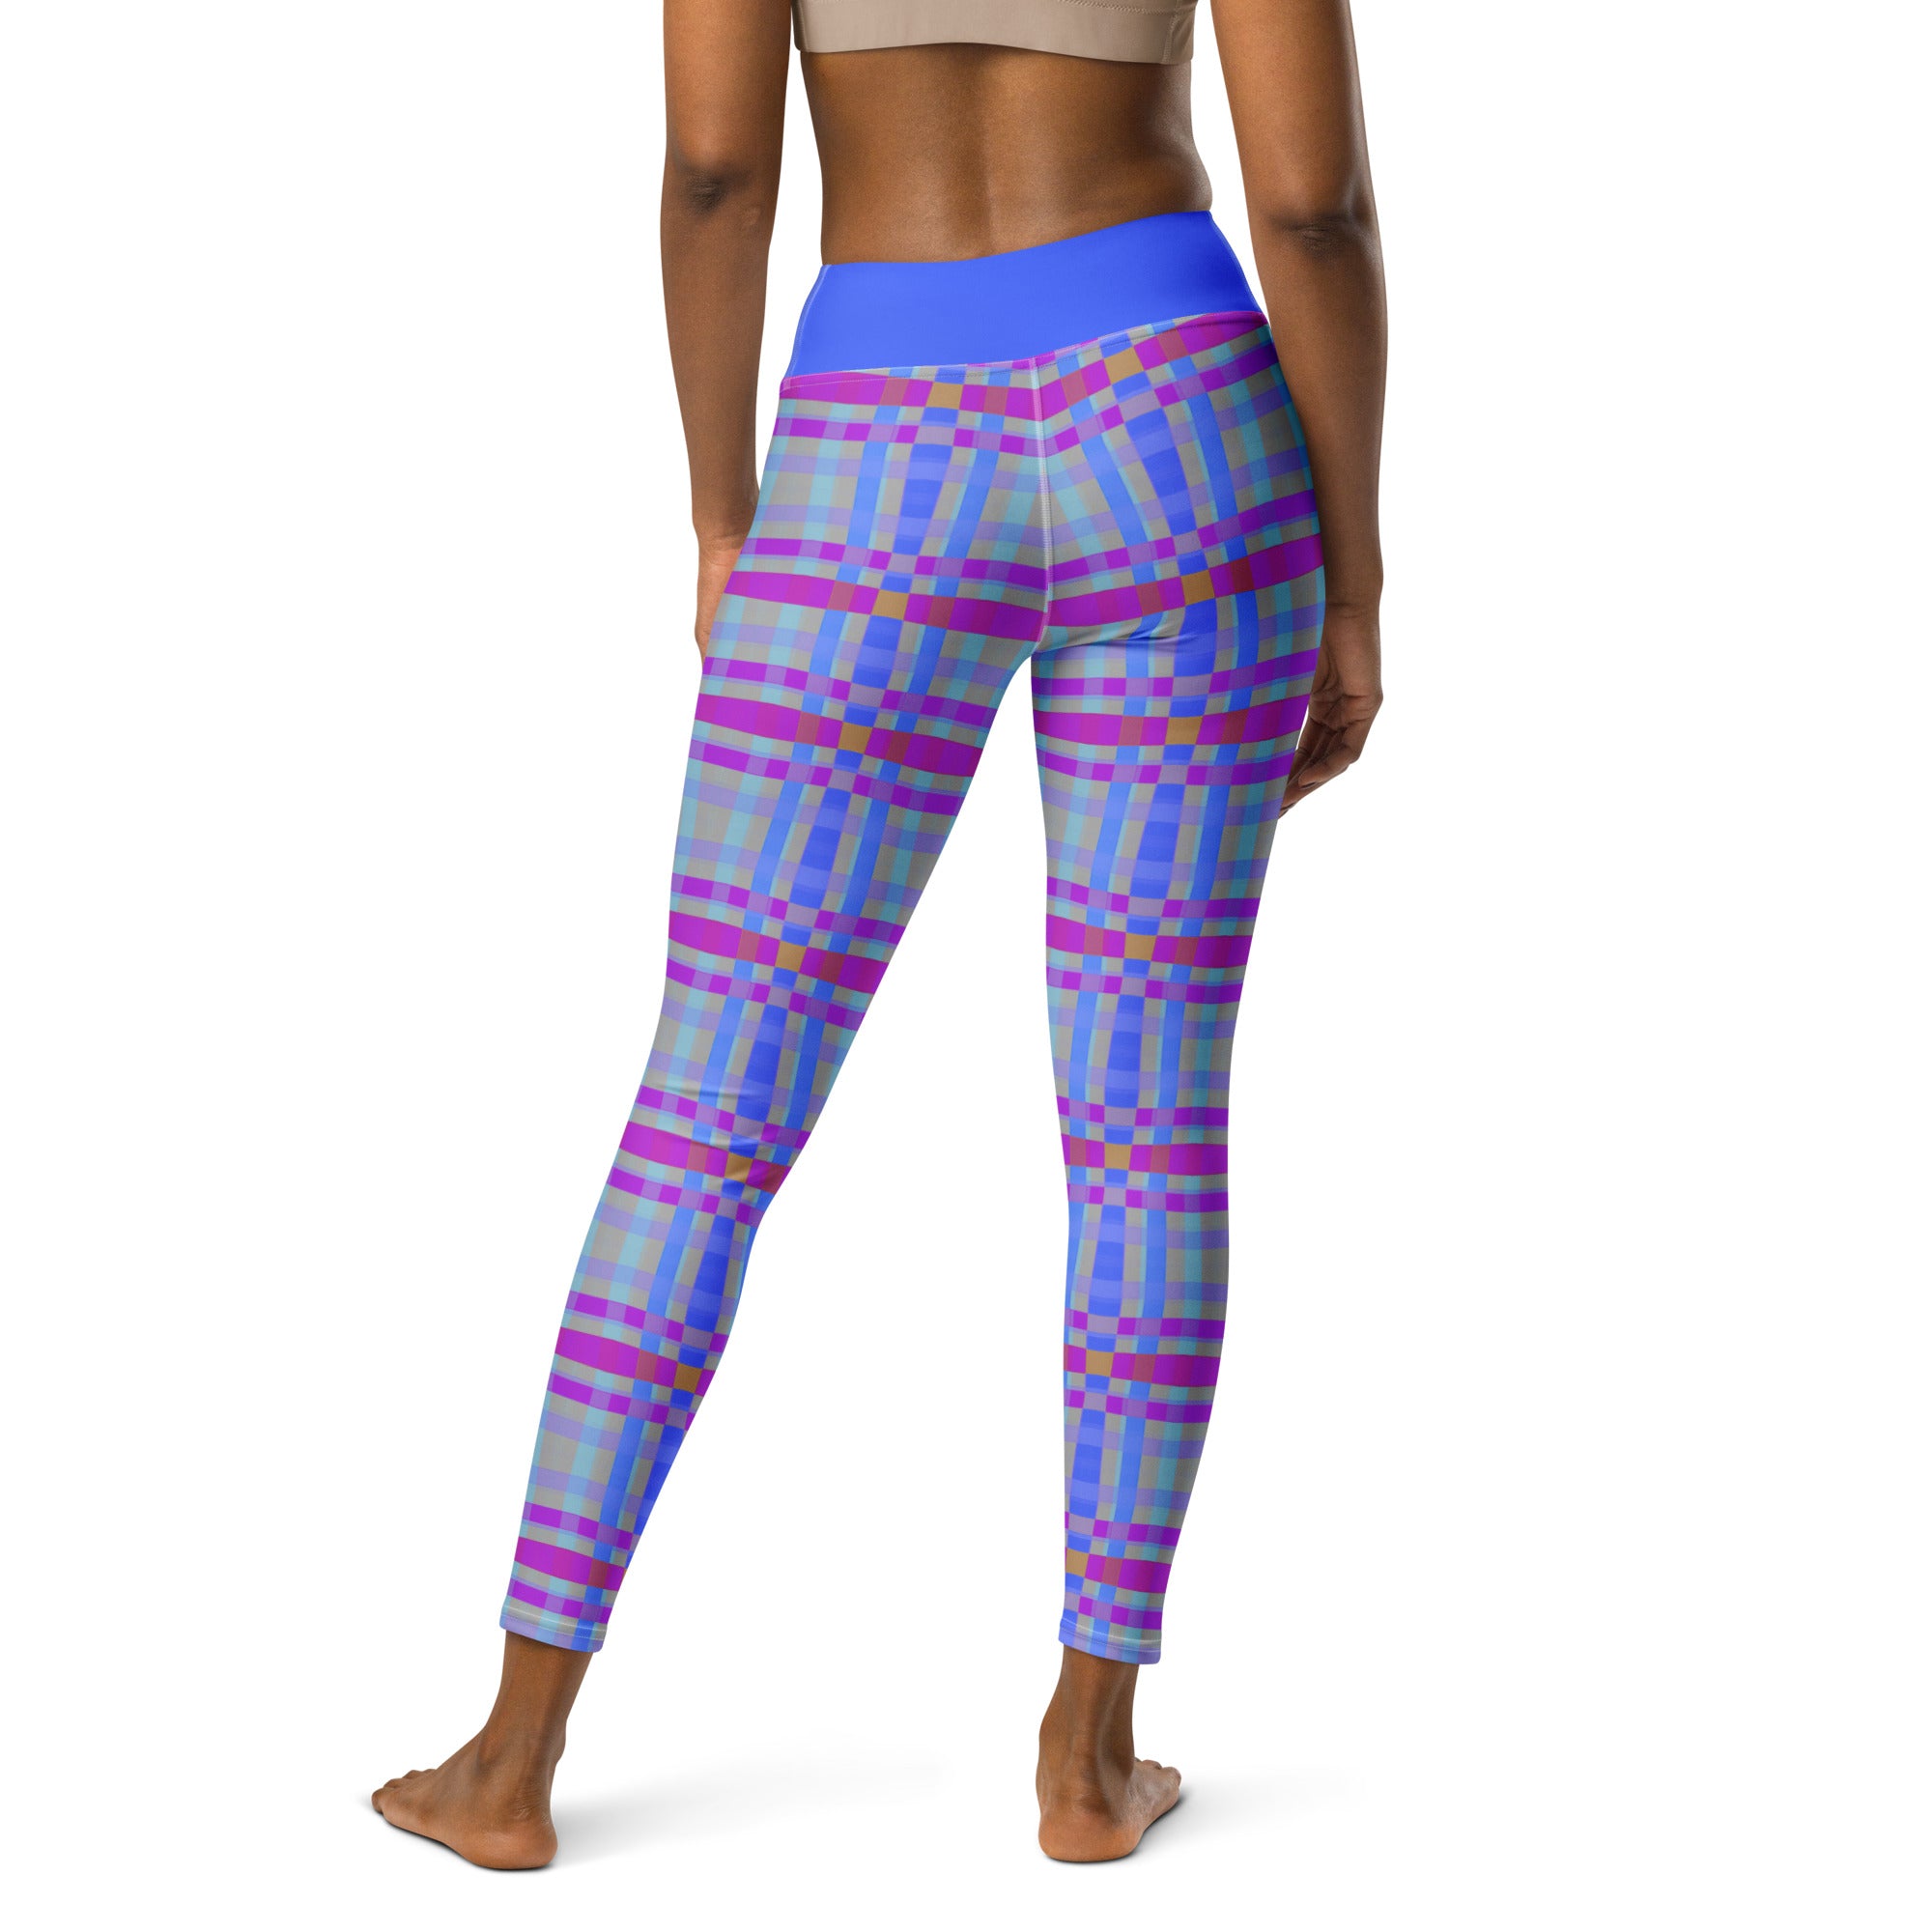 Vibrant activewear for fitness enthusiasts